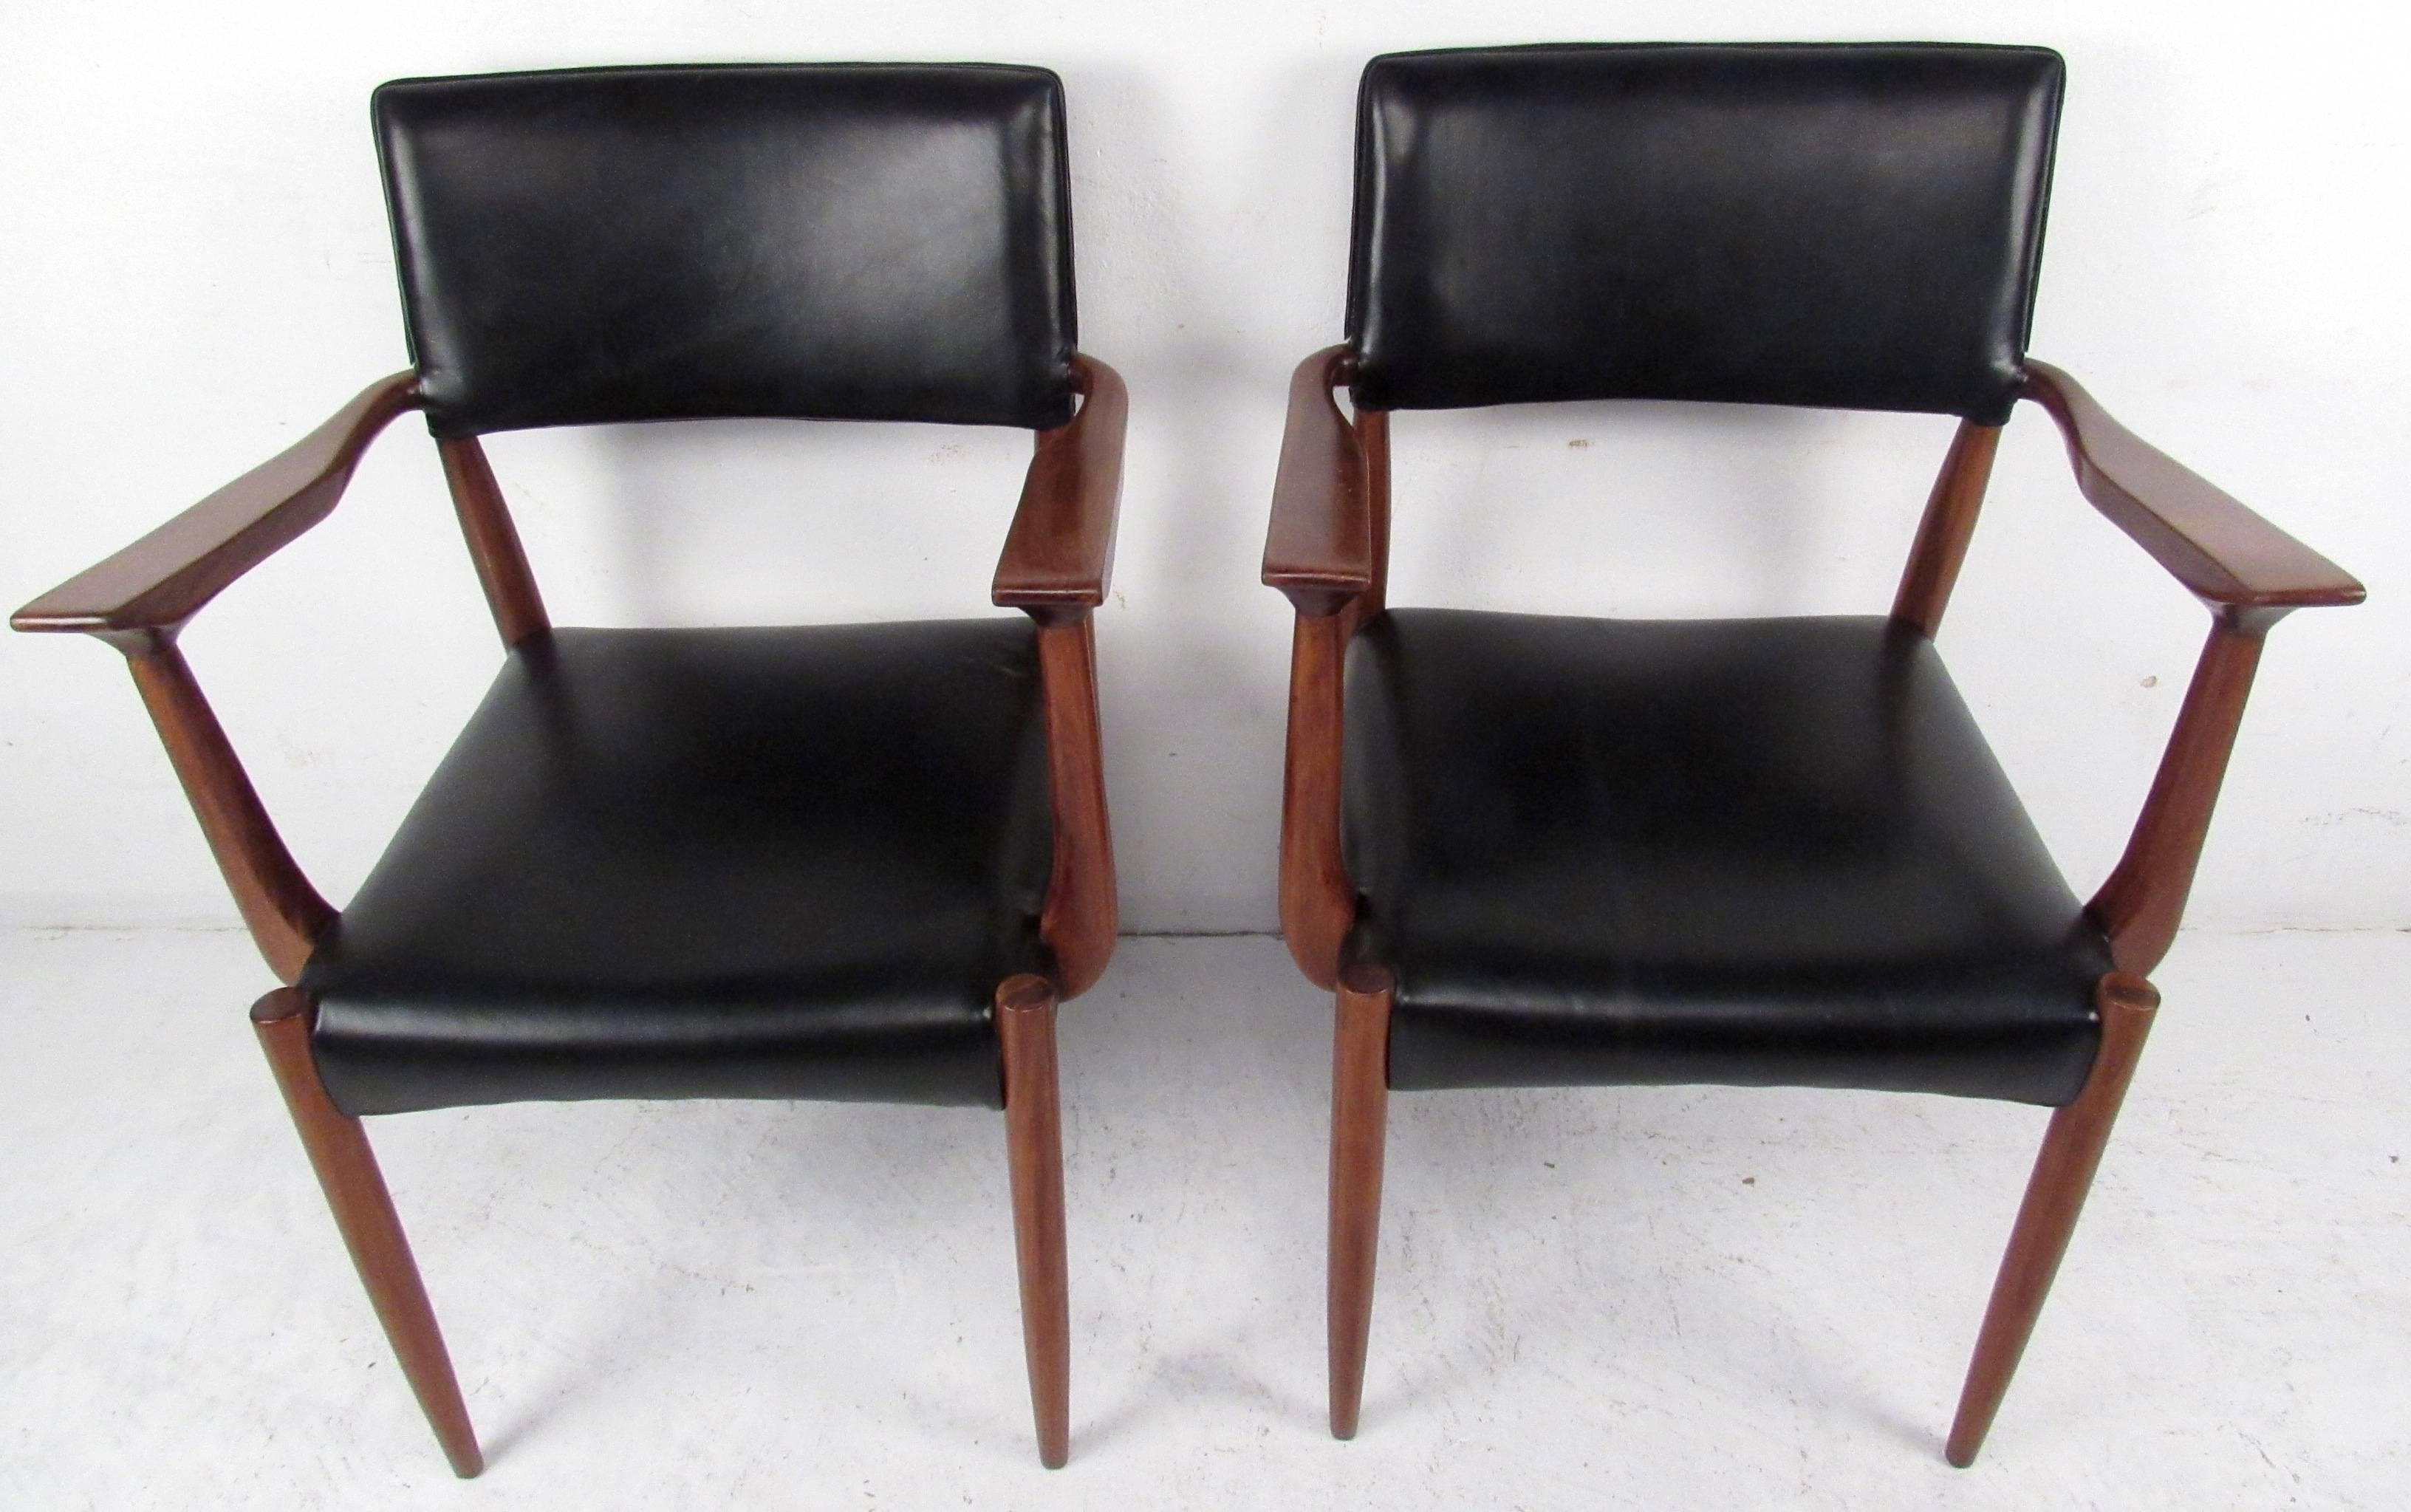 Two vintage-modern armchairs featuring sculpted rosewood body with leather upholstered seat and backrest.

Please confirm item location NY or NJ with dealer.